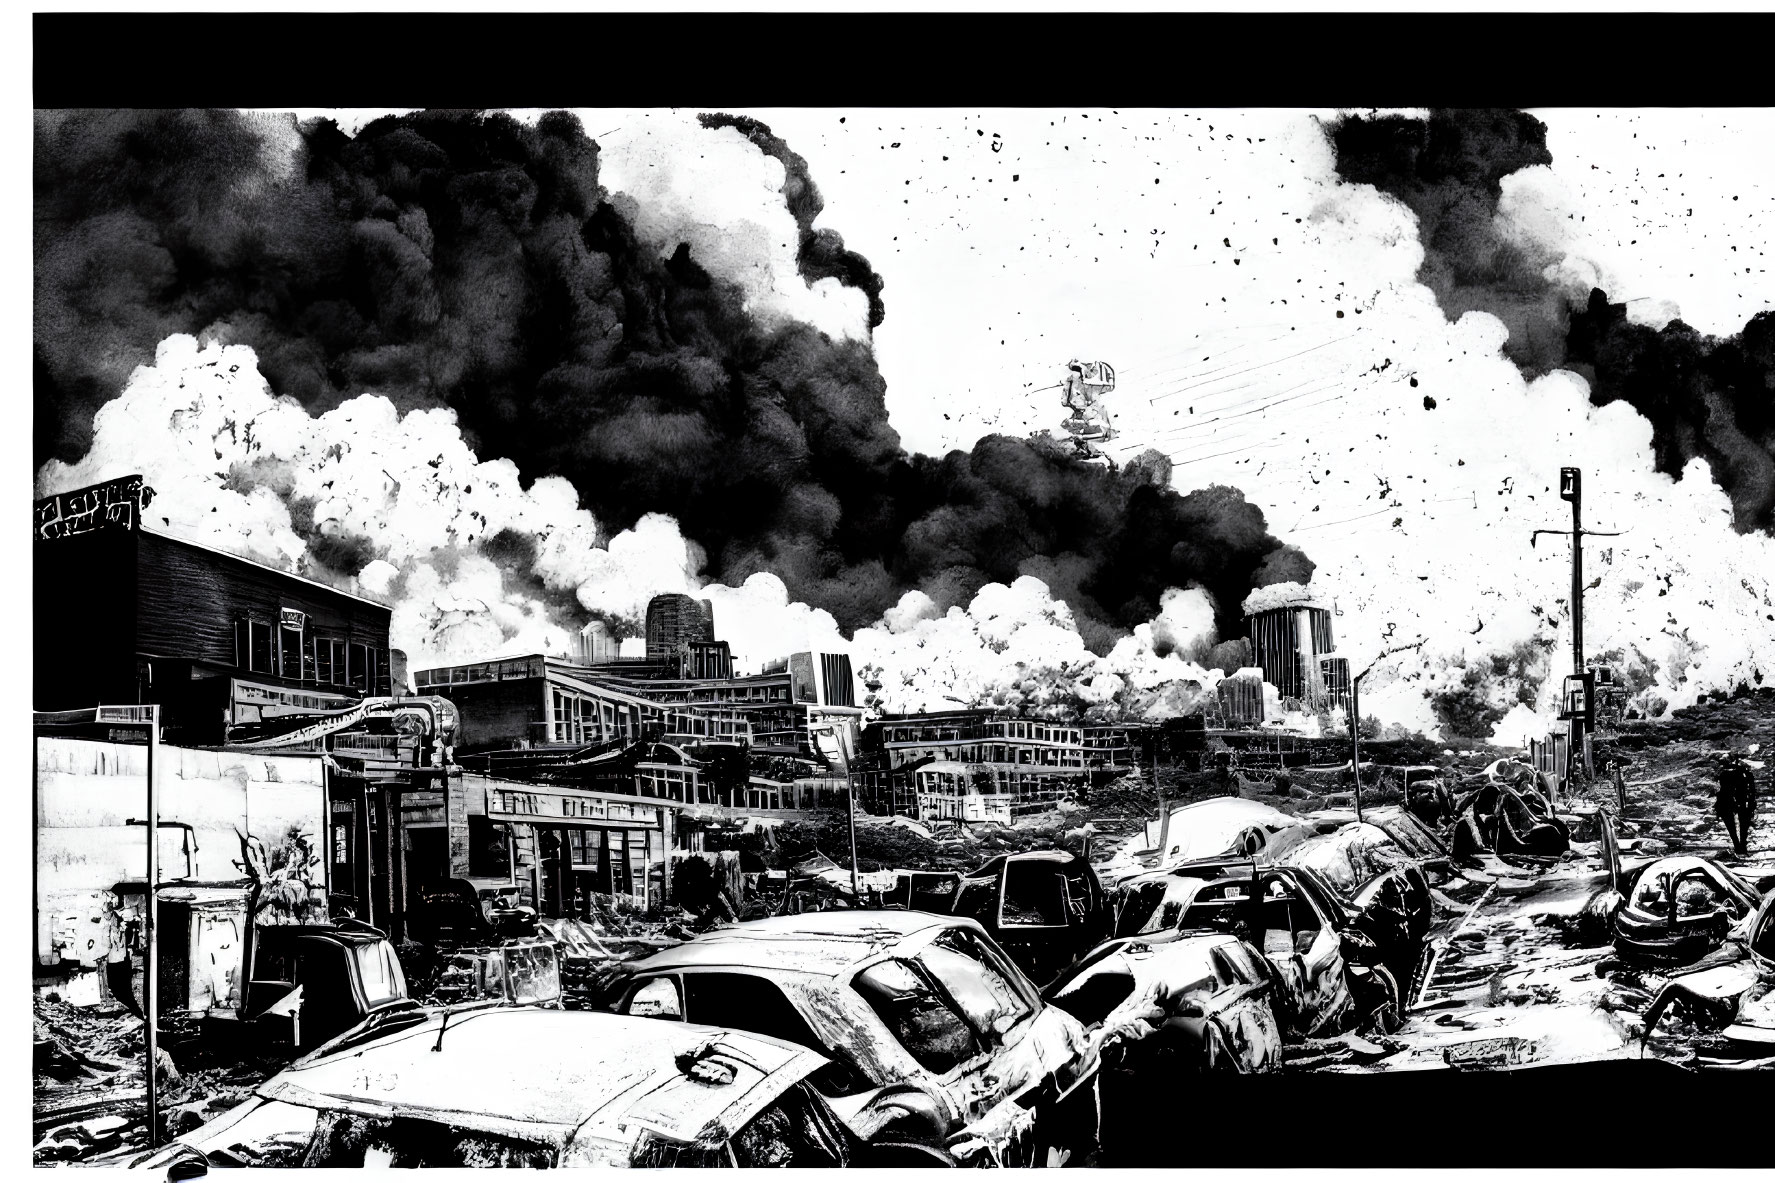 Monochrome post-apocalyptic urban landscape with abandoned cars and desolate buildings